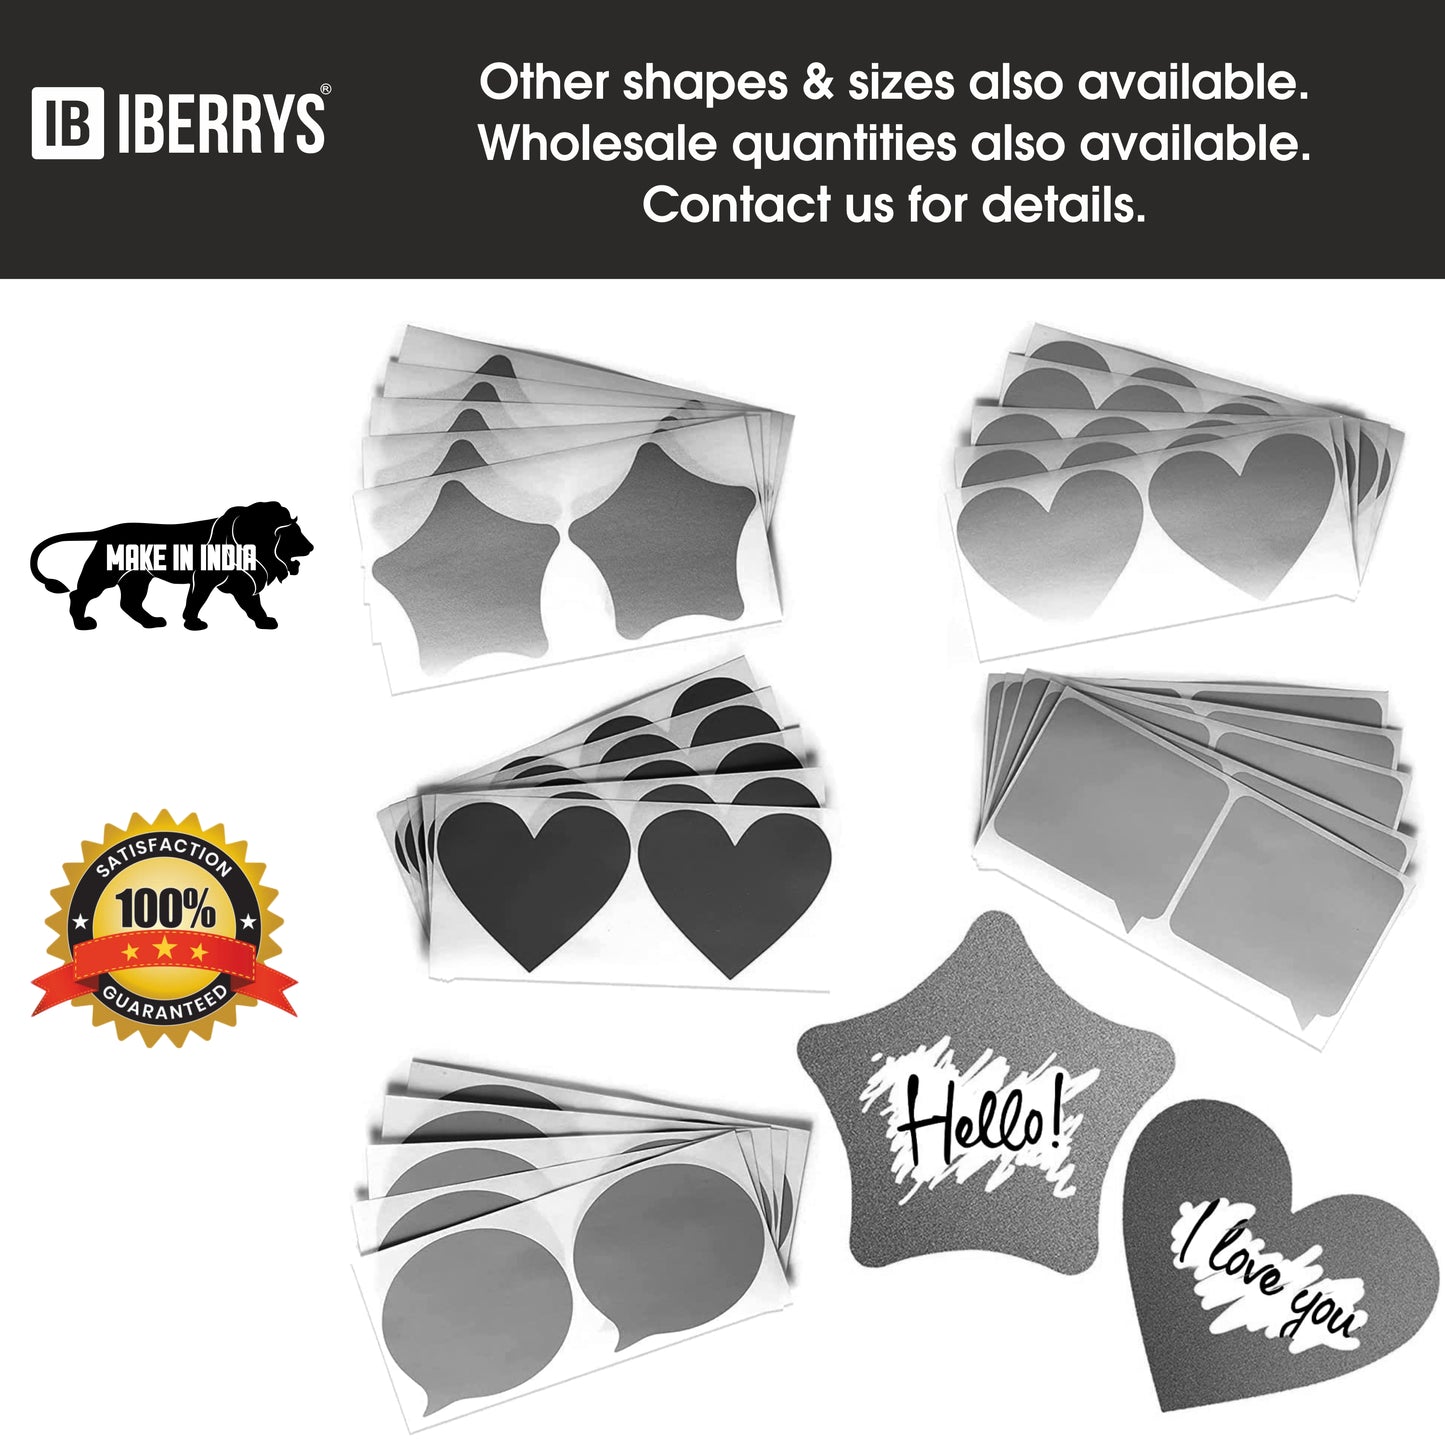 iberry's 1.35 x 1.50 Scratch Off Label Stickers|Silver Scratch Stickers for Baby Shower, Sale Events, Festival Offers, Sale Offers,Surprising |Heart Shape Peel Off Scratch Stickers